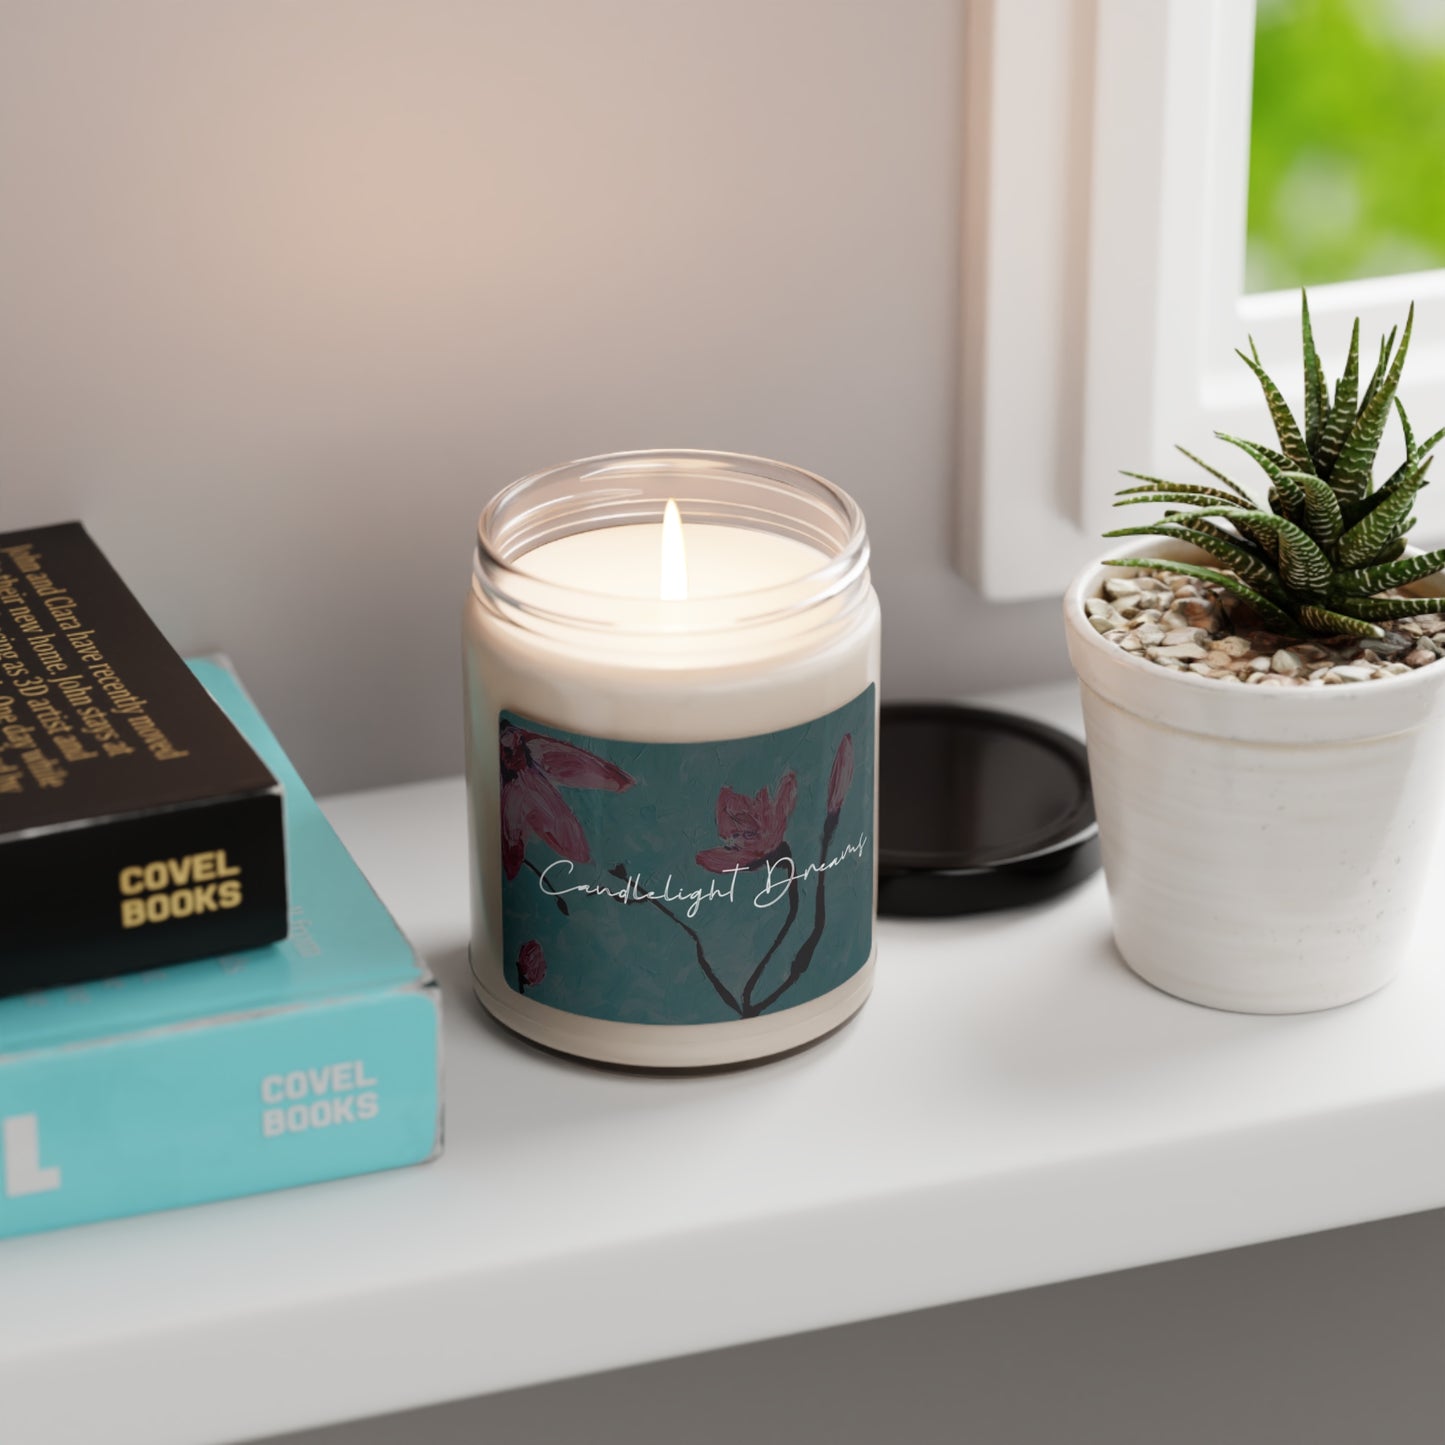 Scented Soy Candle "Candelight Dreams"